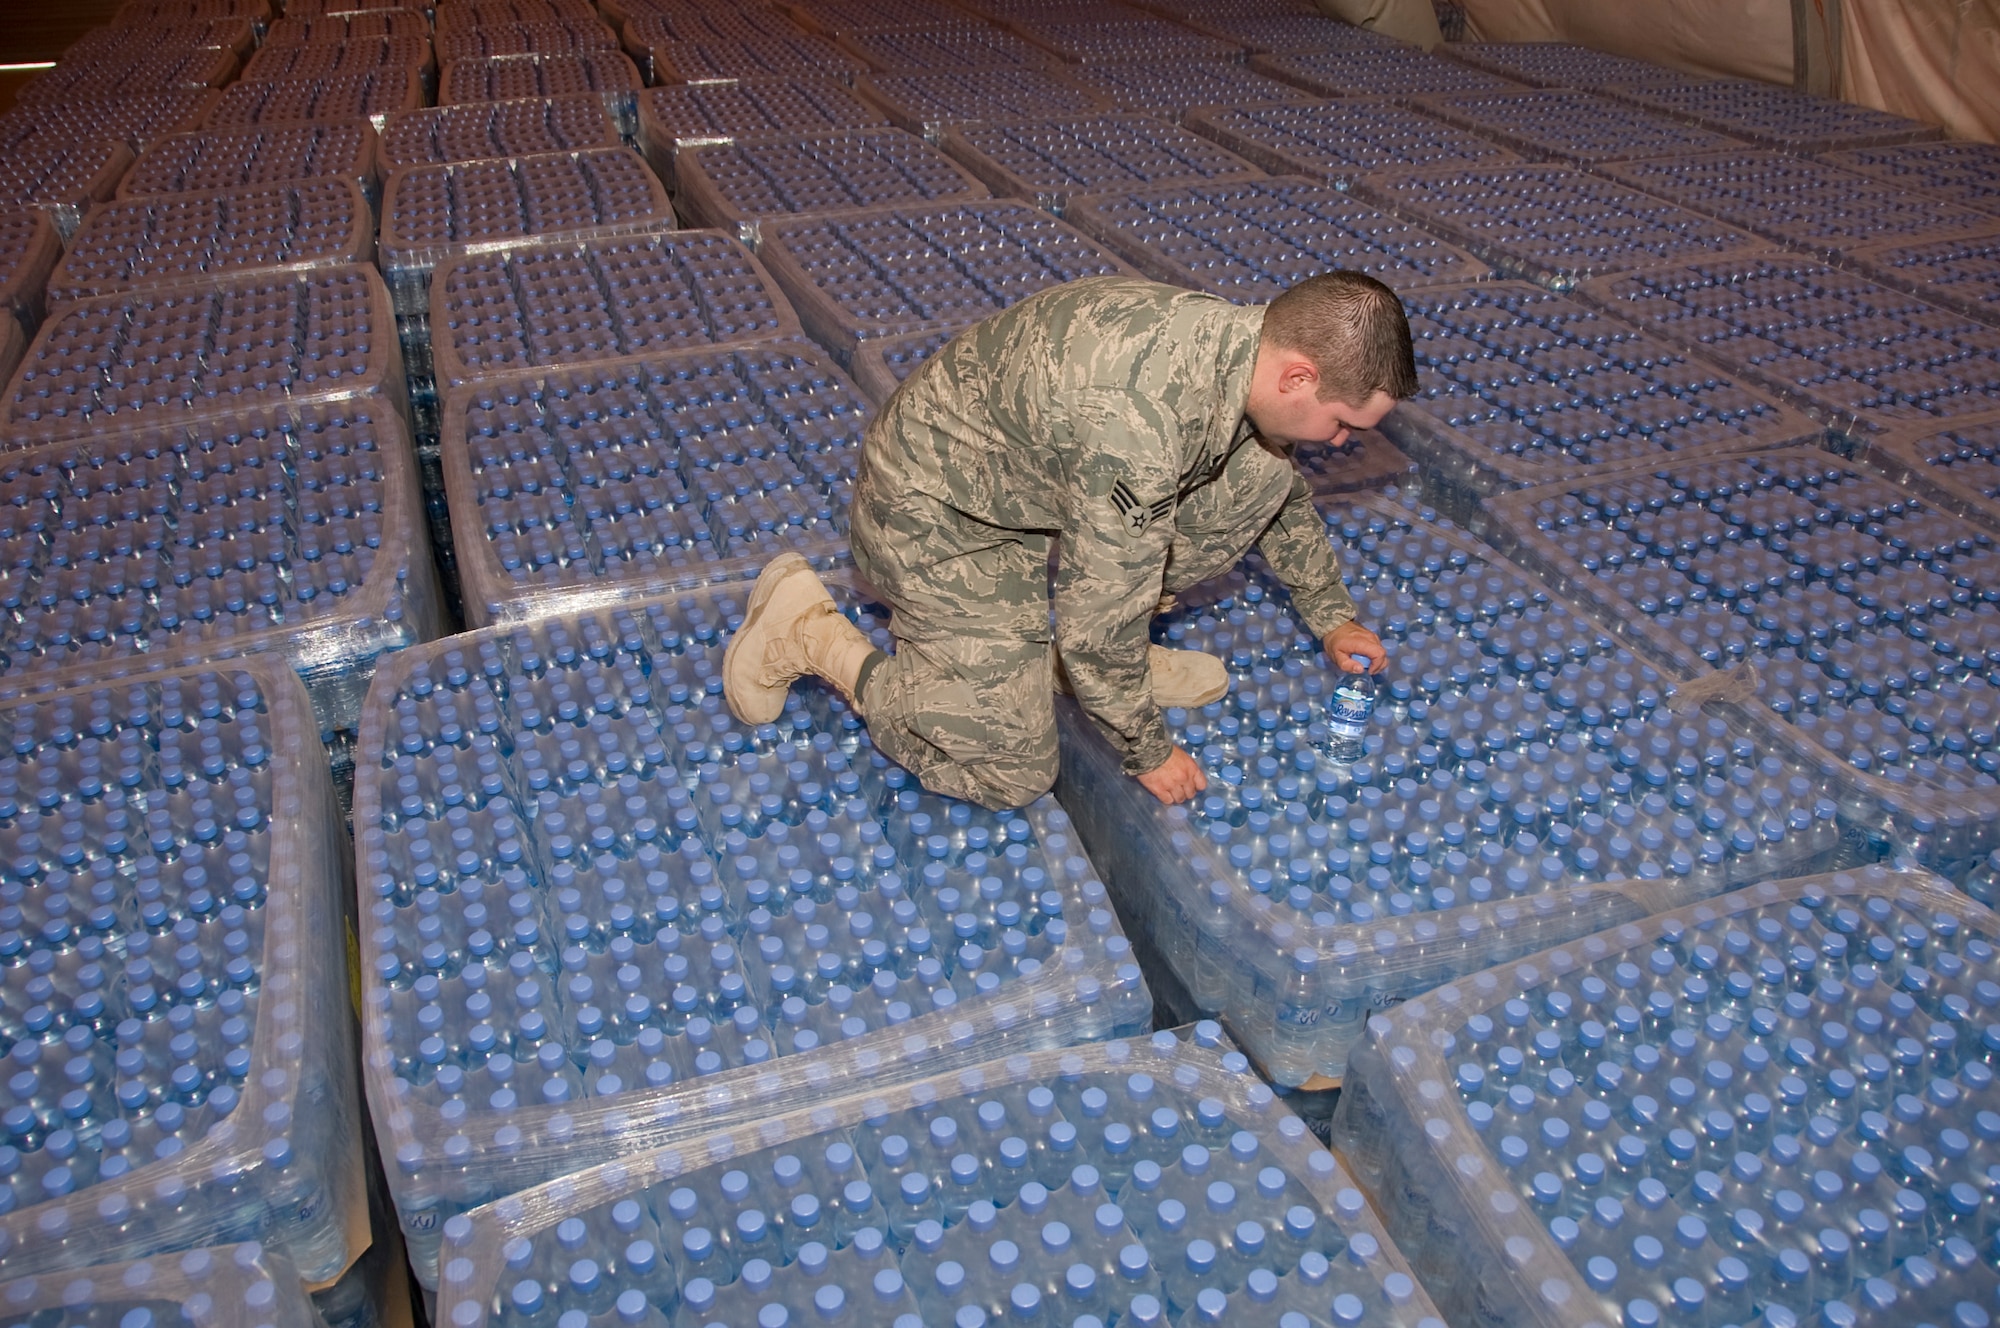 Senior Airman Ryan Smith, 379th Expeditionary Medical Group Bioenvironmental environmental program manager, pulls a random bottle of water from a pallet of water with a specific production date. Smith pulls and tests random bottles from every shipment of water to ensure all water is free of any form of bacteria. More than 1.3 million bottles of water are consumed at this installation every month. (U.S. Air Force photo/Senior Airman Bryan Swink)